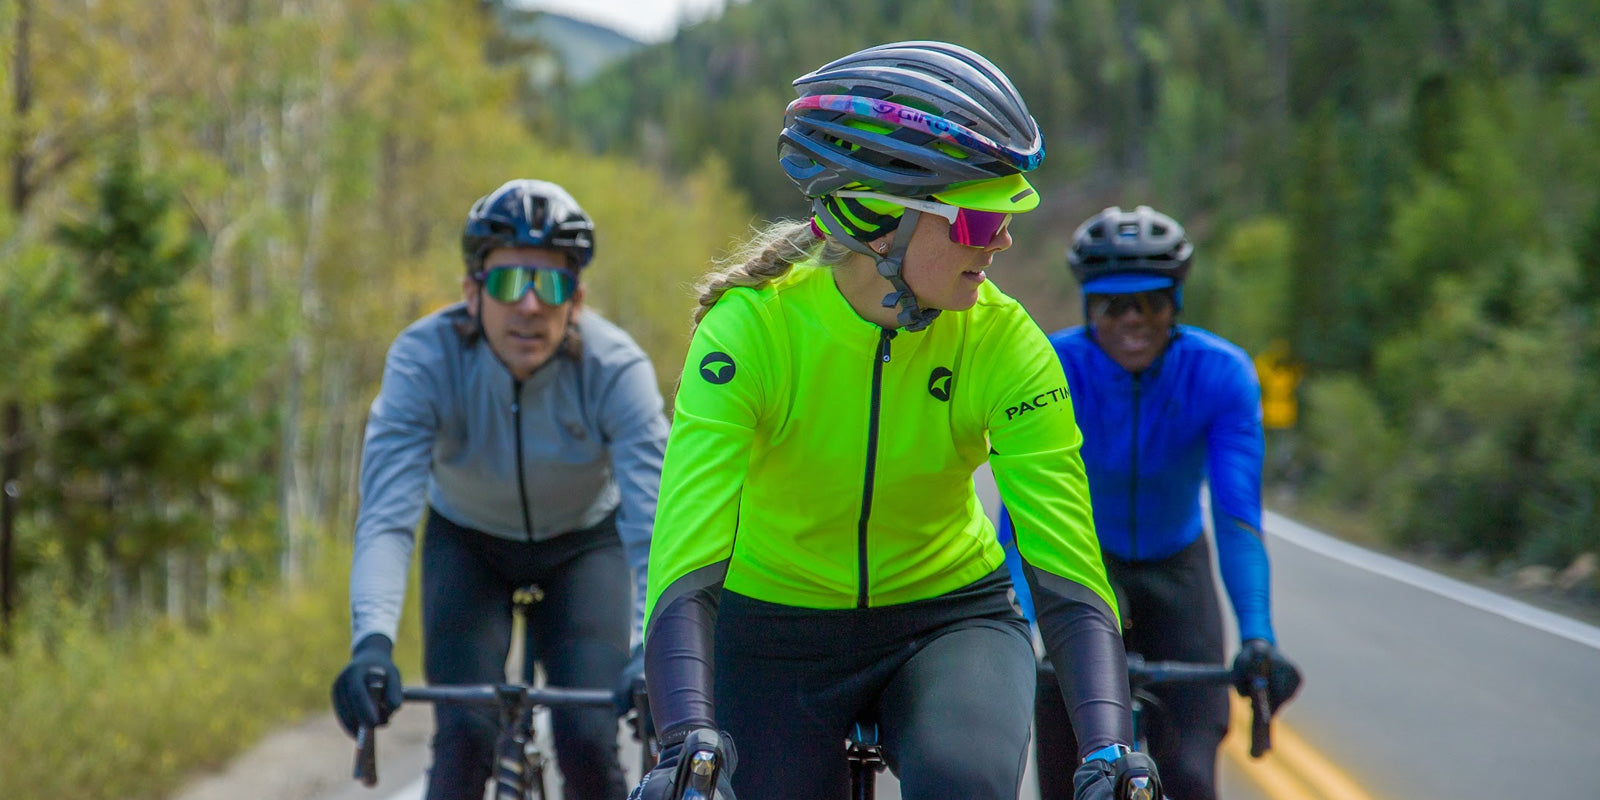 Women's Cool Weather Cycling Clothing from Indy freelance